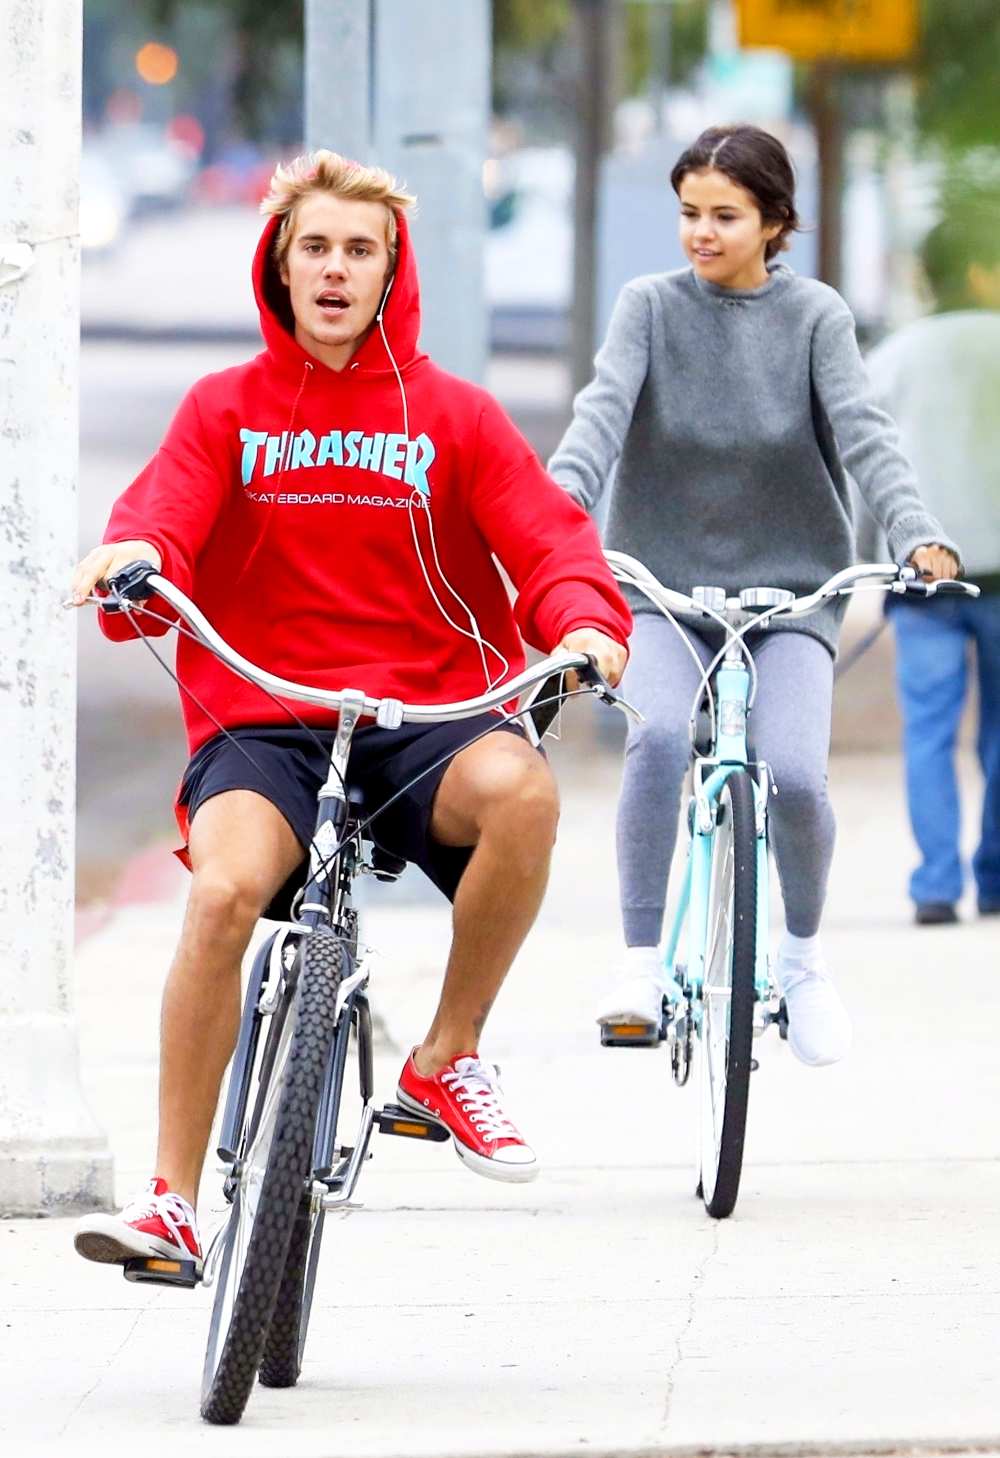 Justin Bieber and Selena Gomez step out together for a biking session in Los Angeles, California on November 1, 2017.